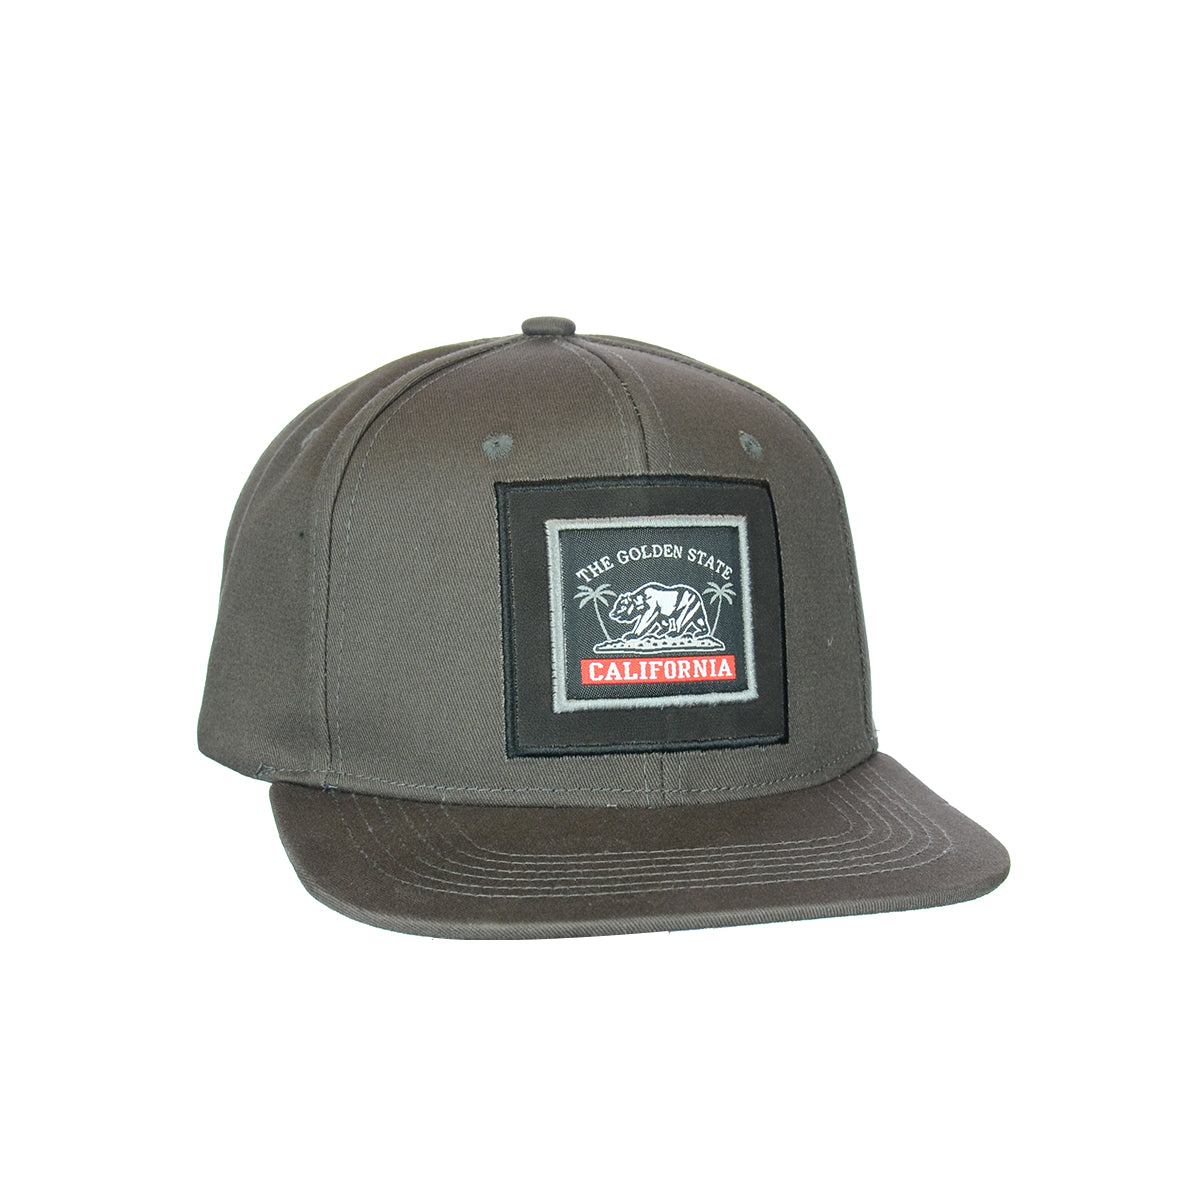 Snapback "California" Hat Embroidered